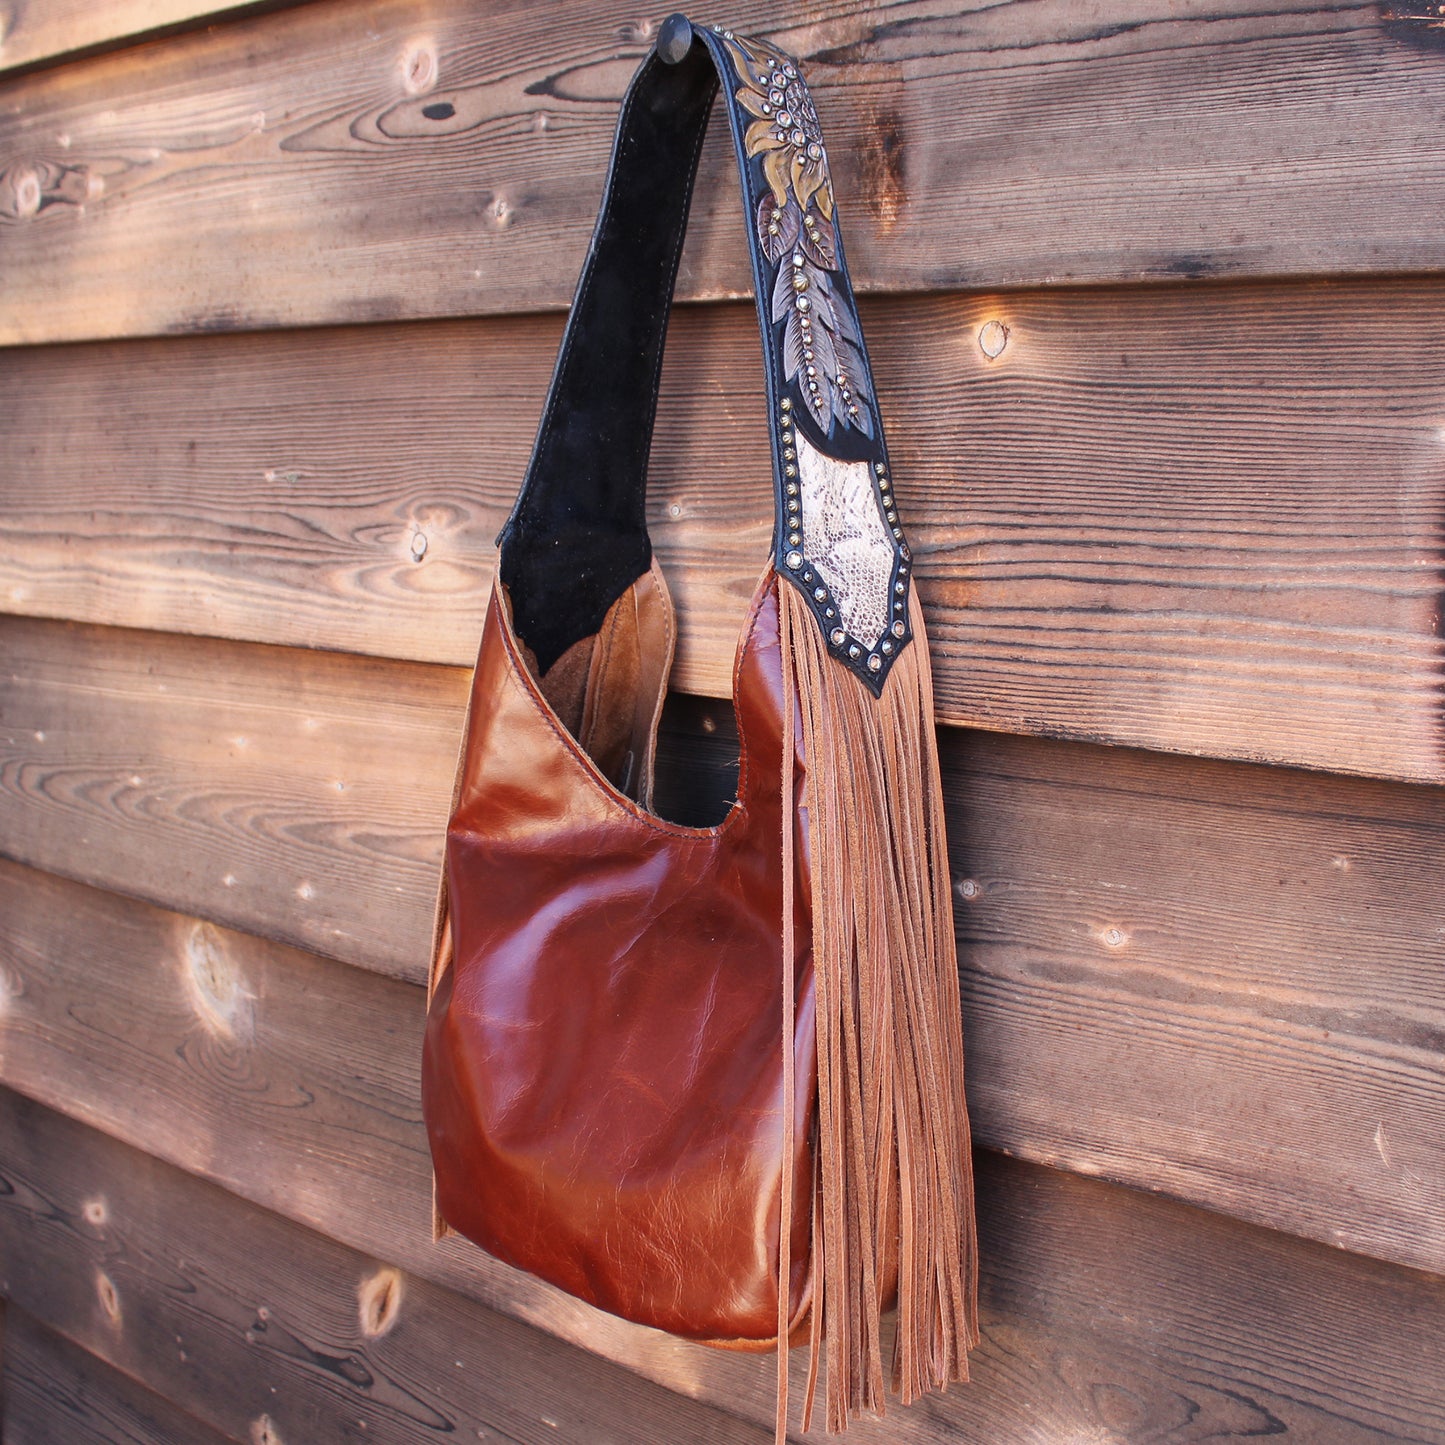 
                  
                    A Marilyn bag #974 by Heritage Brand, made of brown leather with a black strap and decorative fringe against a wooden background.
                  
                